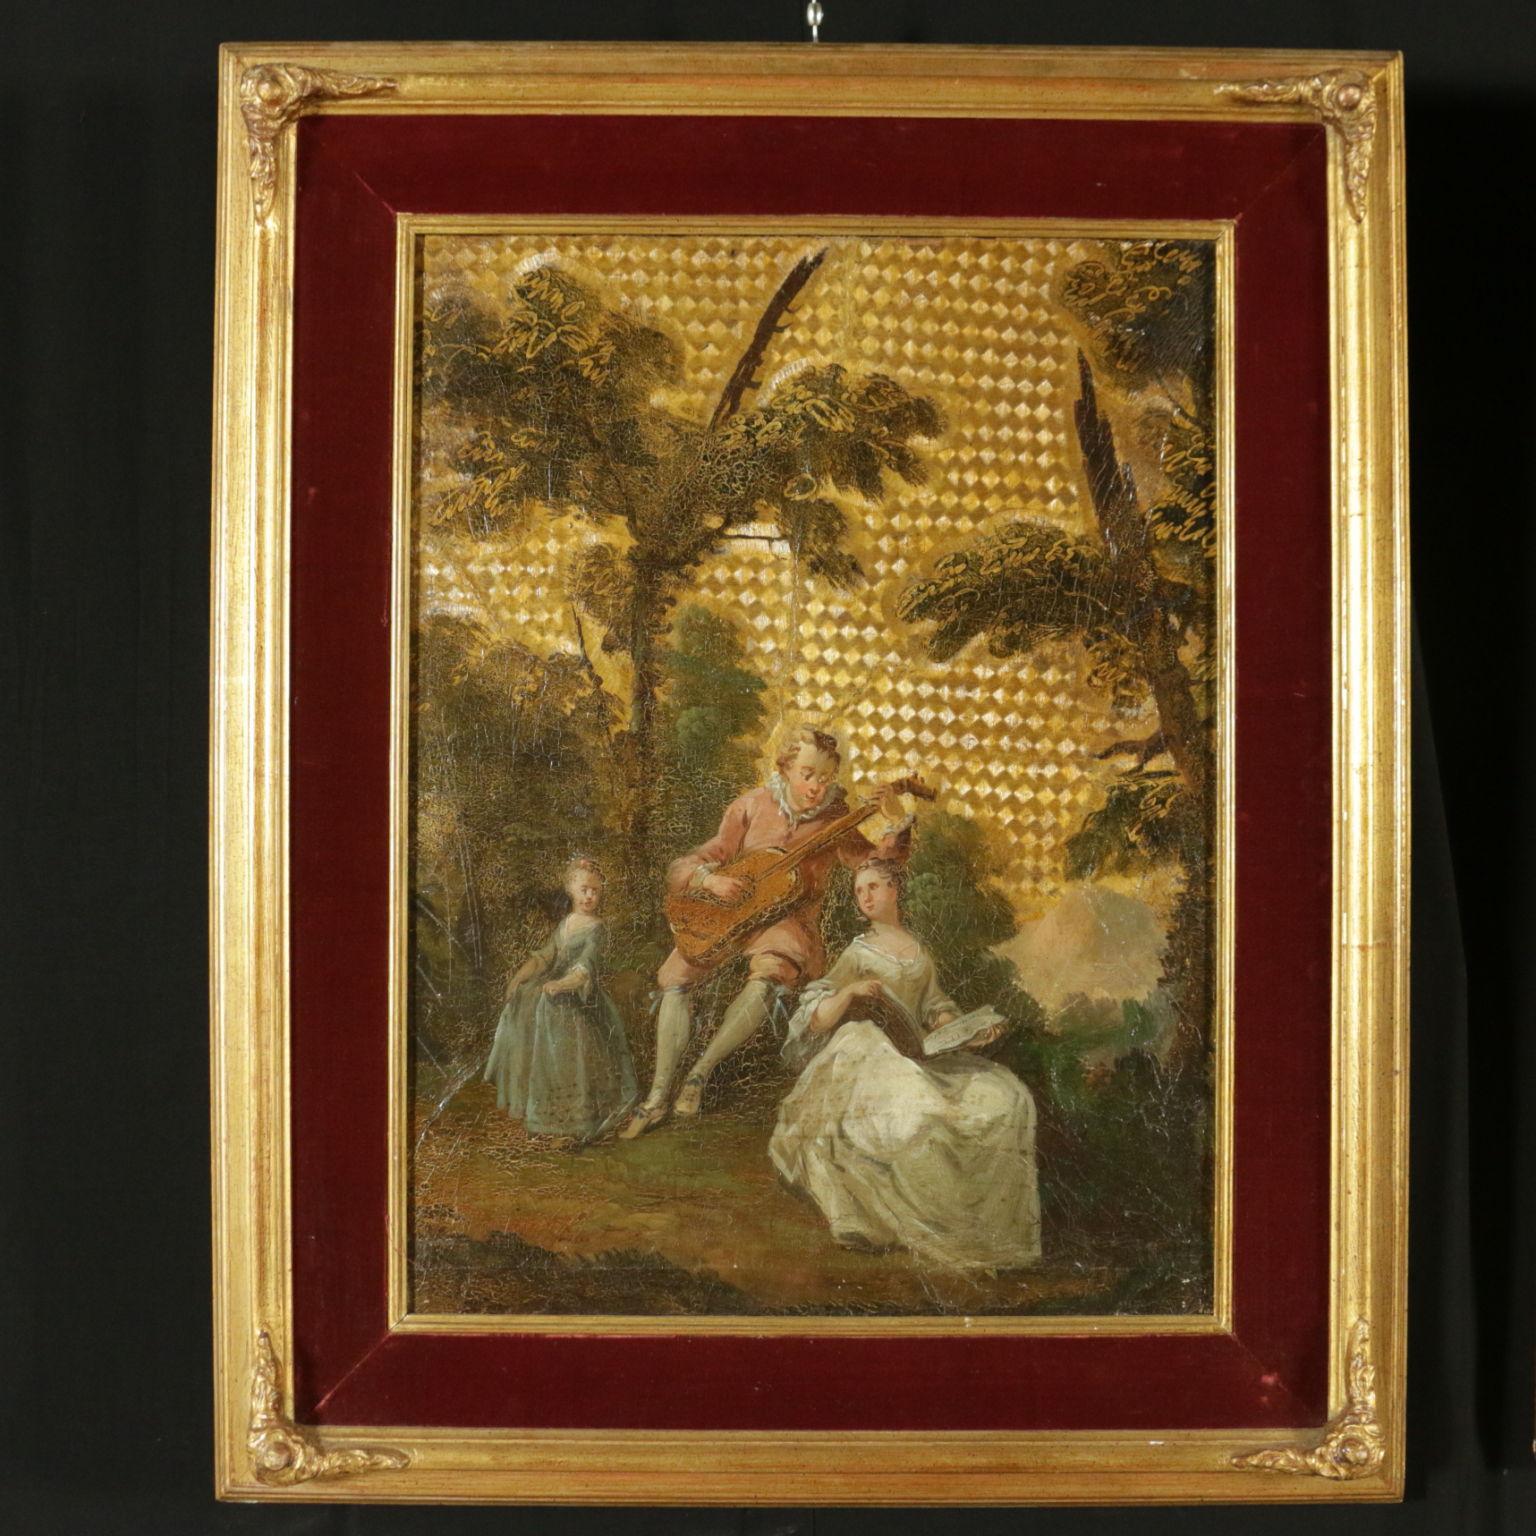 Matching Paintings on Leather 18th Century, Gallant Scene and Bucolic Scene  - Brown Figurative Painting by Unknown